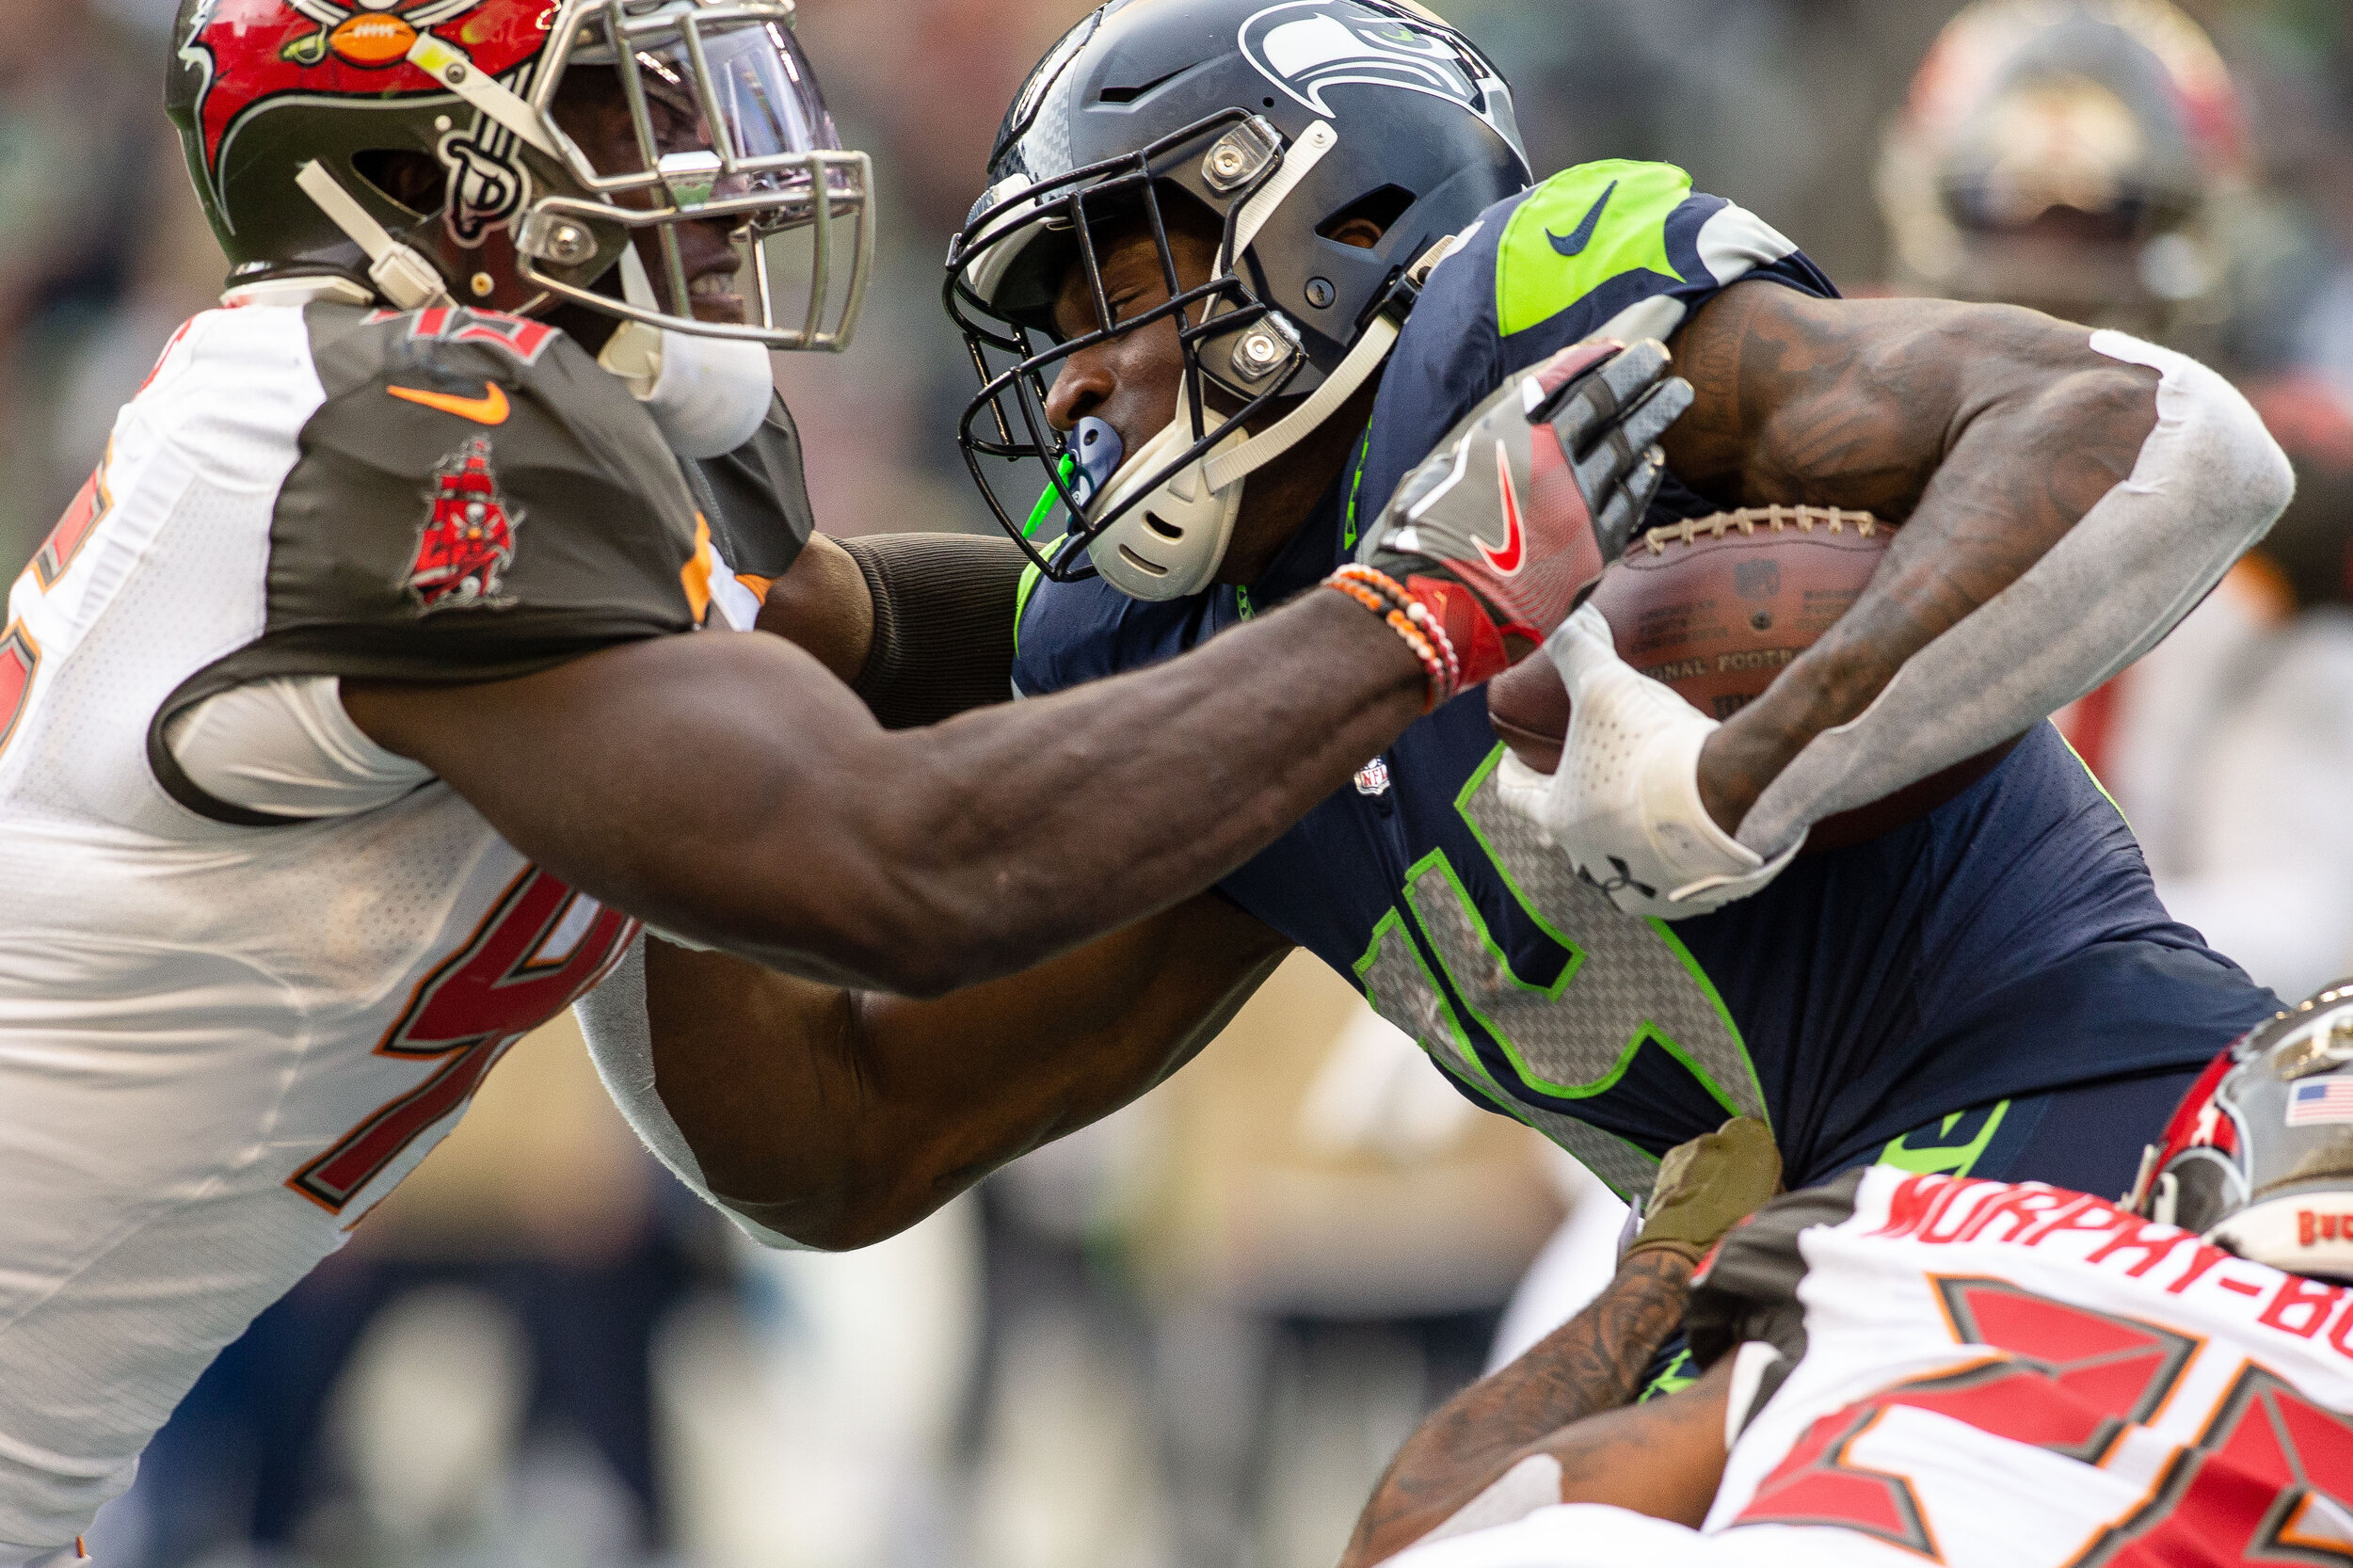  Seattle Seahawks wide receiver D.K. Metcalf (14) runs with the ball after contact with Tampa Bay Buccaneers defensive back Sean Murphy-Bunting (26) and linebacker Devin White (45) during the third quarter of an NFL football game, Sunday, Nov. 3, 201